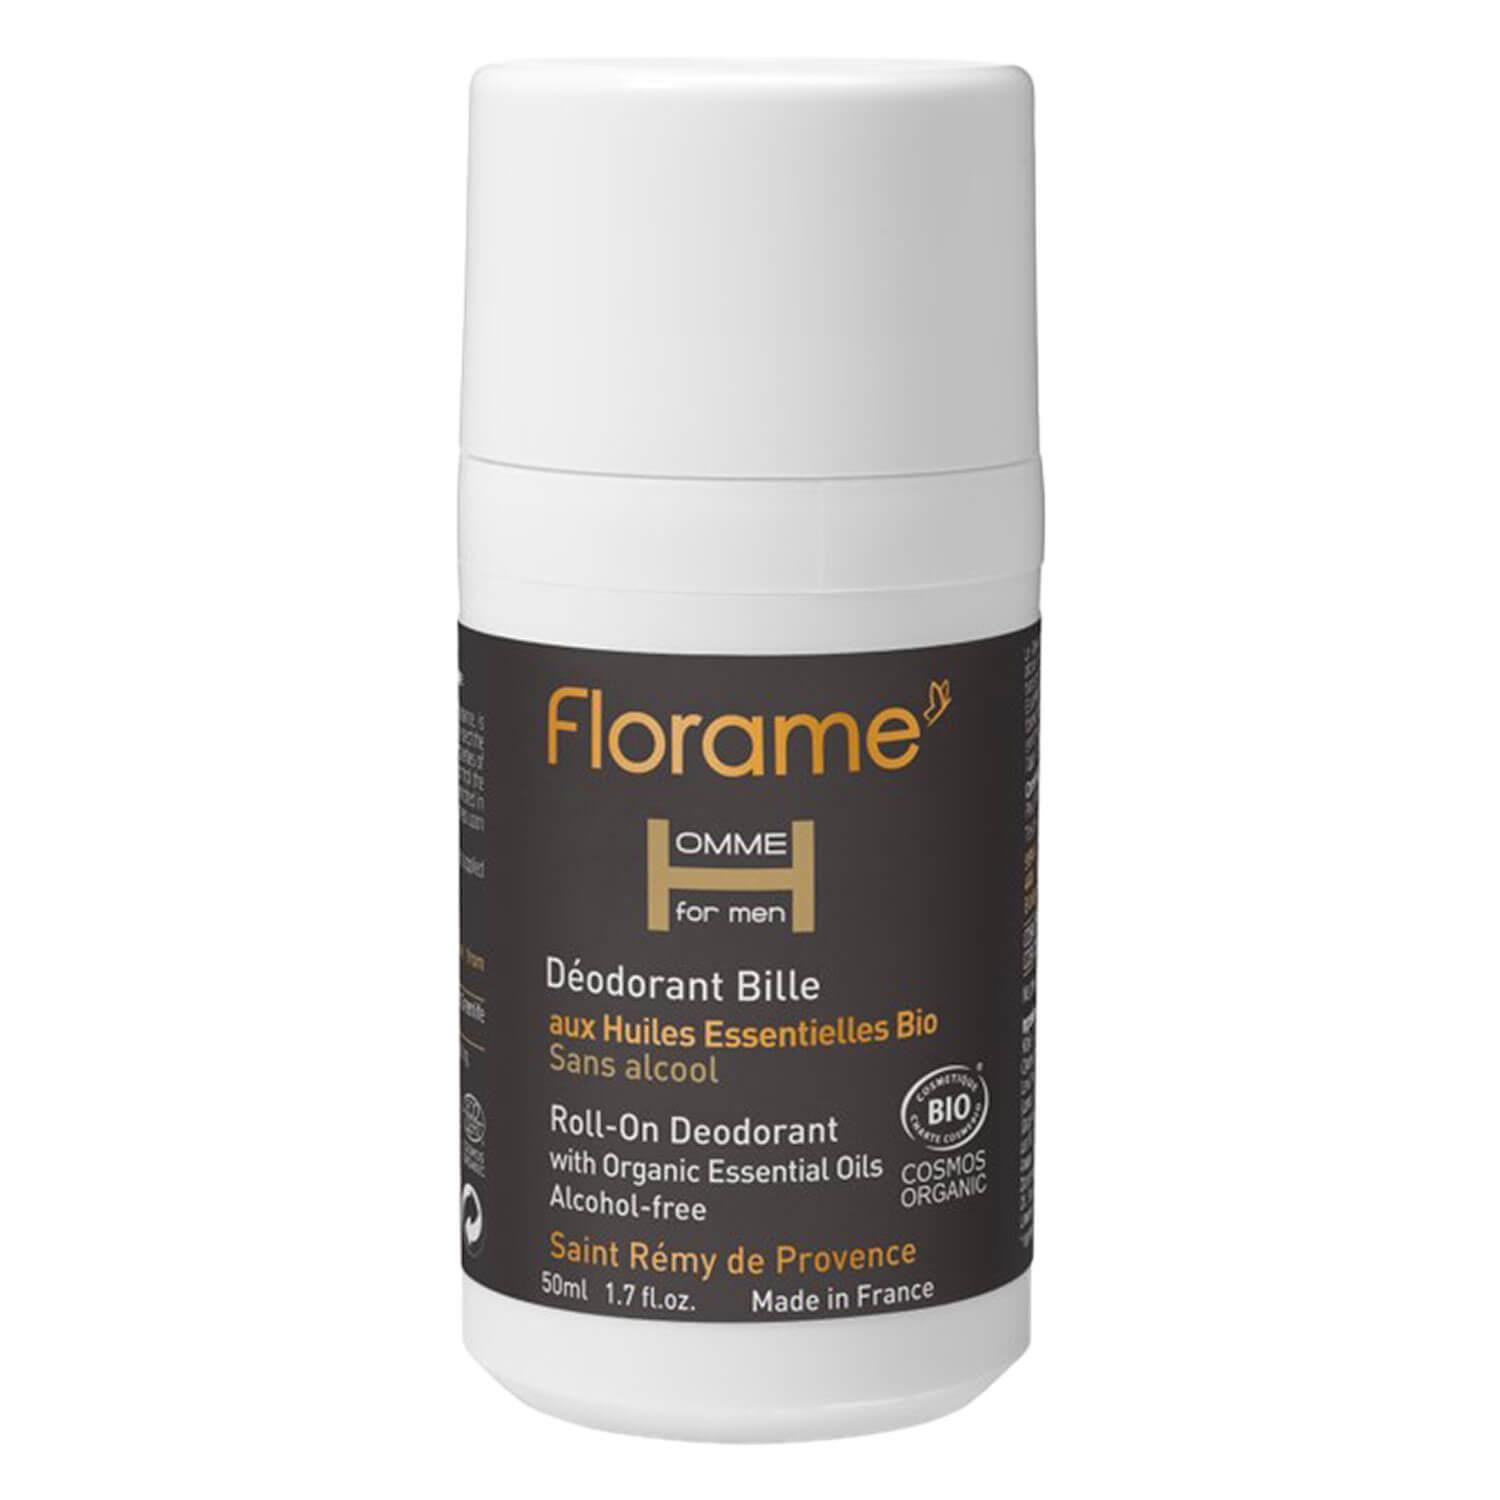 Florame Homme - Roll-on Deodorant